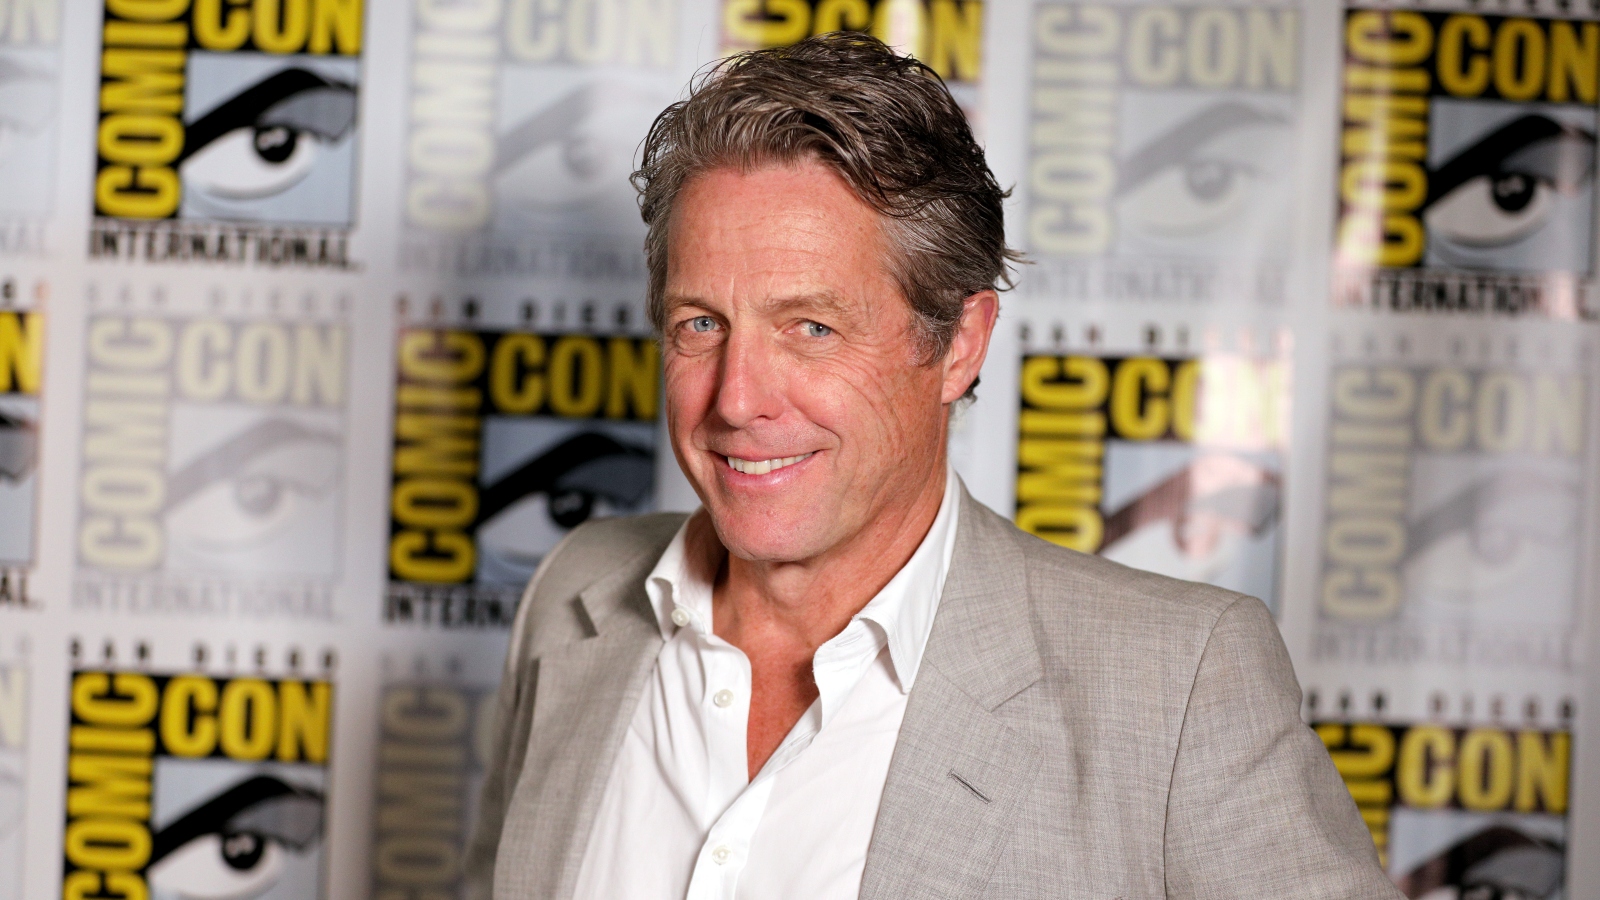 Hugh Grant at the Paramount Pictures and eOne San Diego Comic-Con Presentation of "Dungeons & Dragons: Honor Among Thieves"